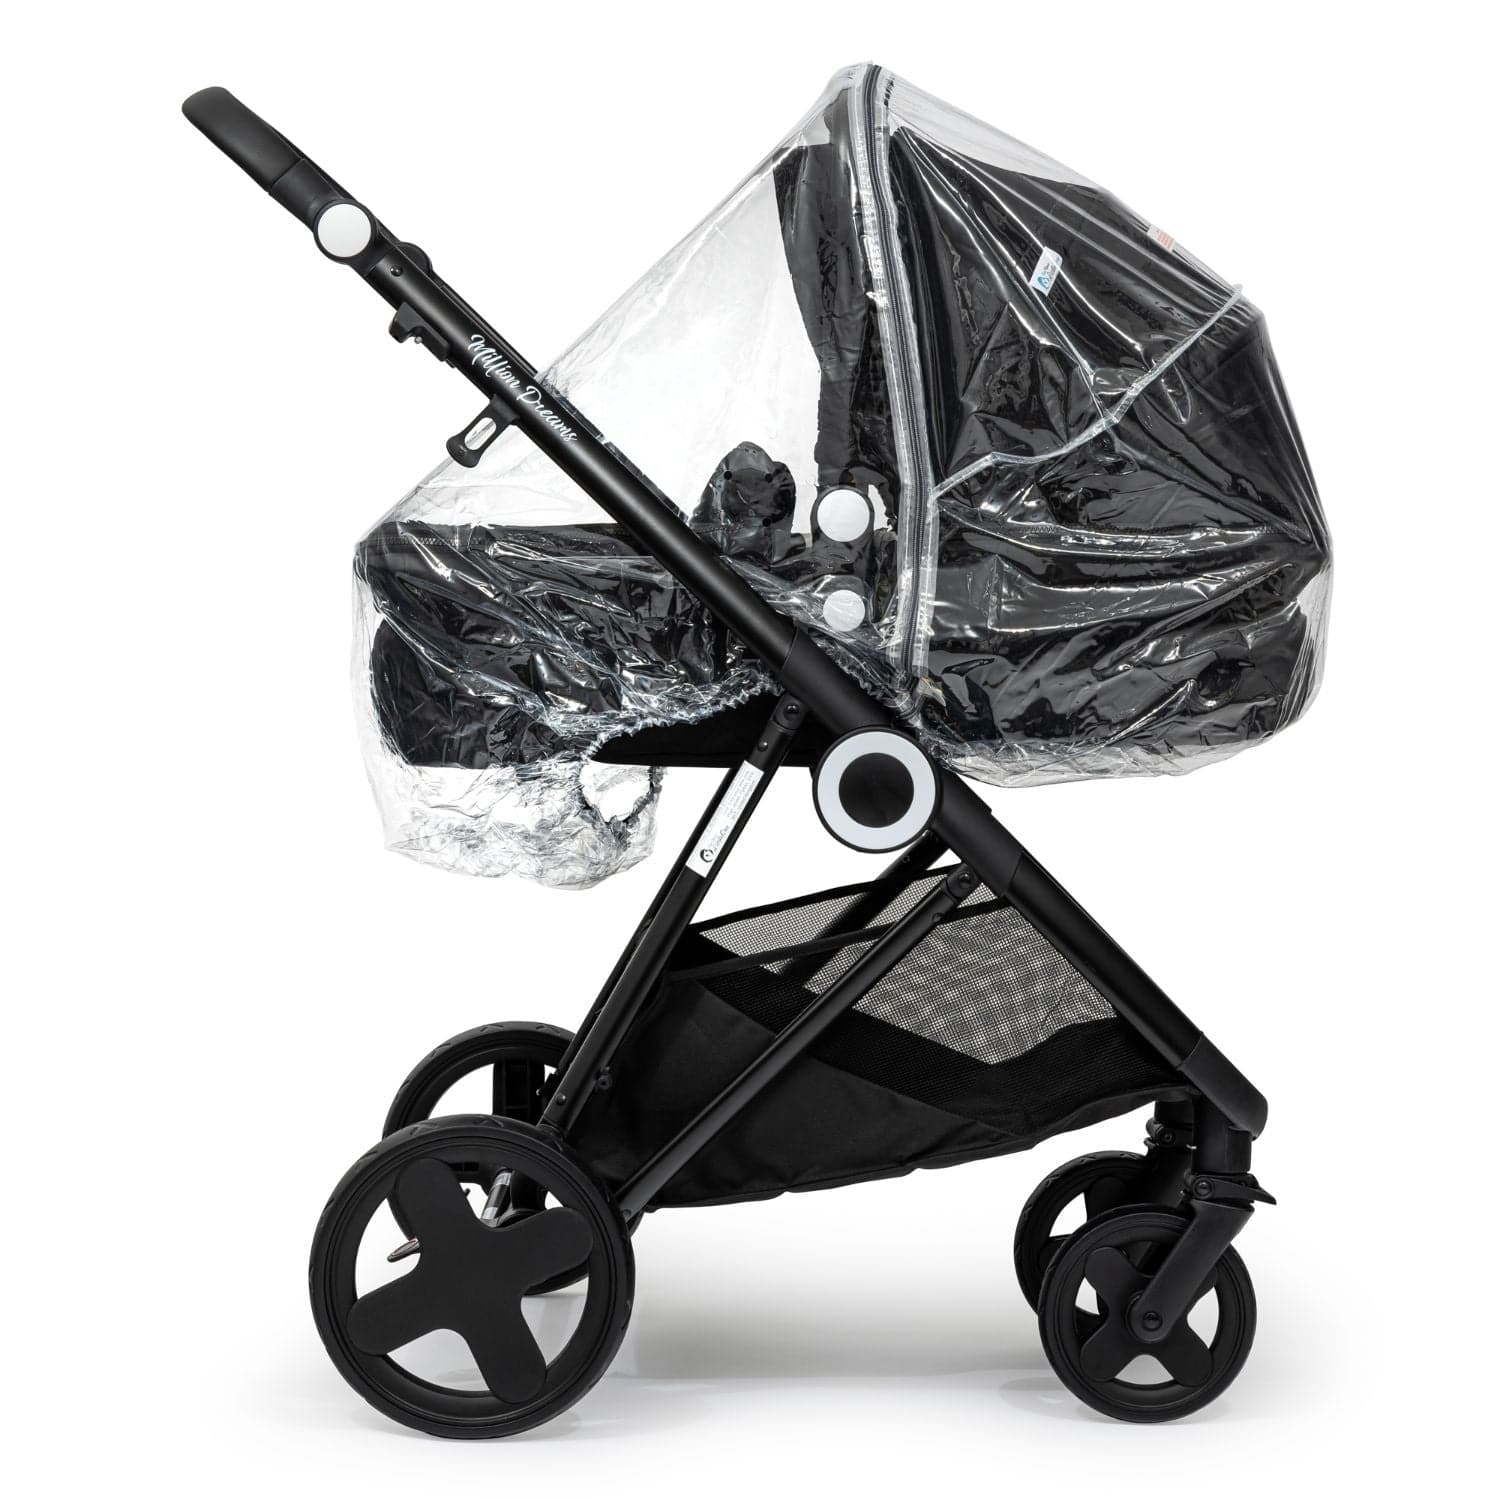 Carrycot Raincover Compatible With Babywelt - Fits All Models - For Your Little One